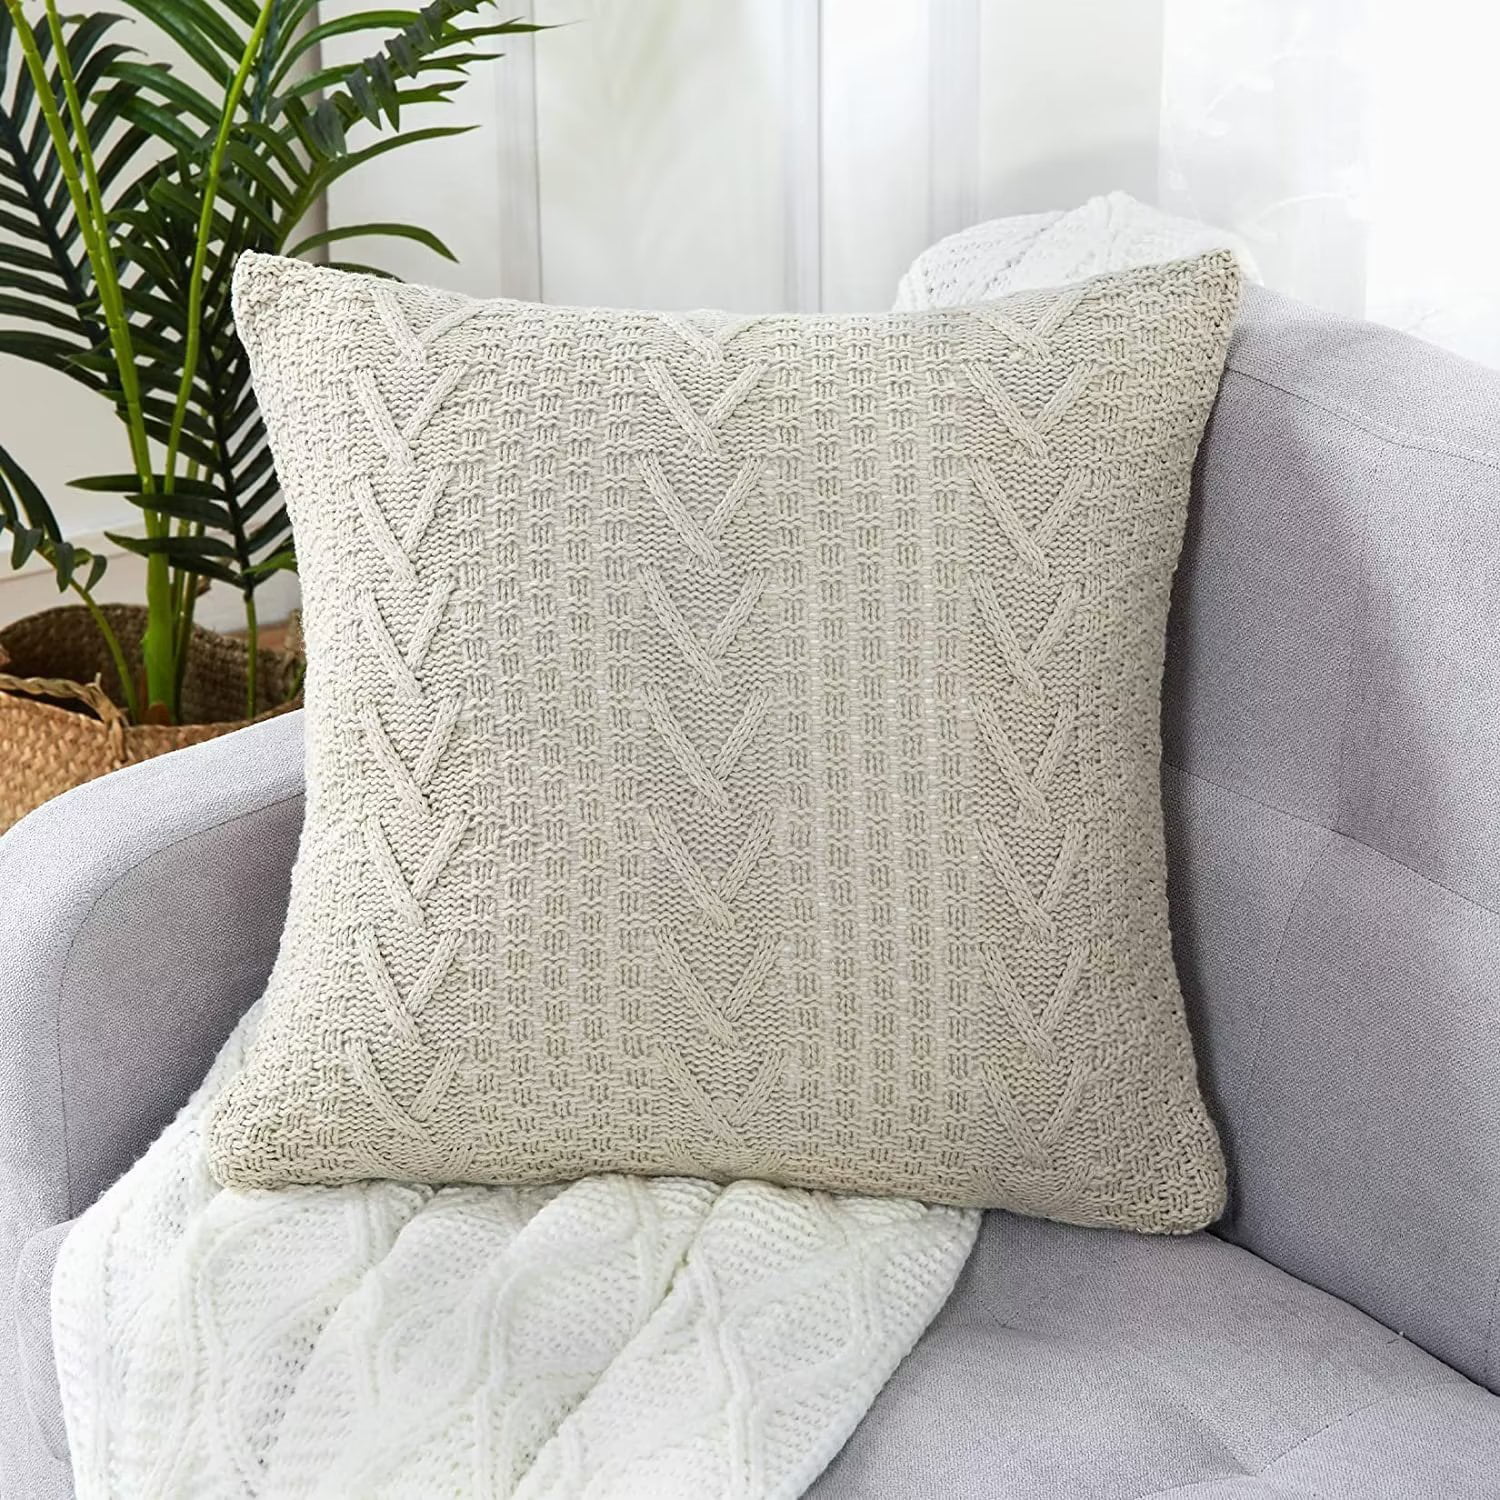 Dsstyles Decorative Pillow Covers 18x18, Square Throw Pillows Cotton Knitted Neutral Throw Pillow Covers Boho Farmhouse Textured Pillows for Home